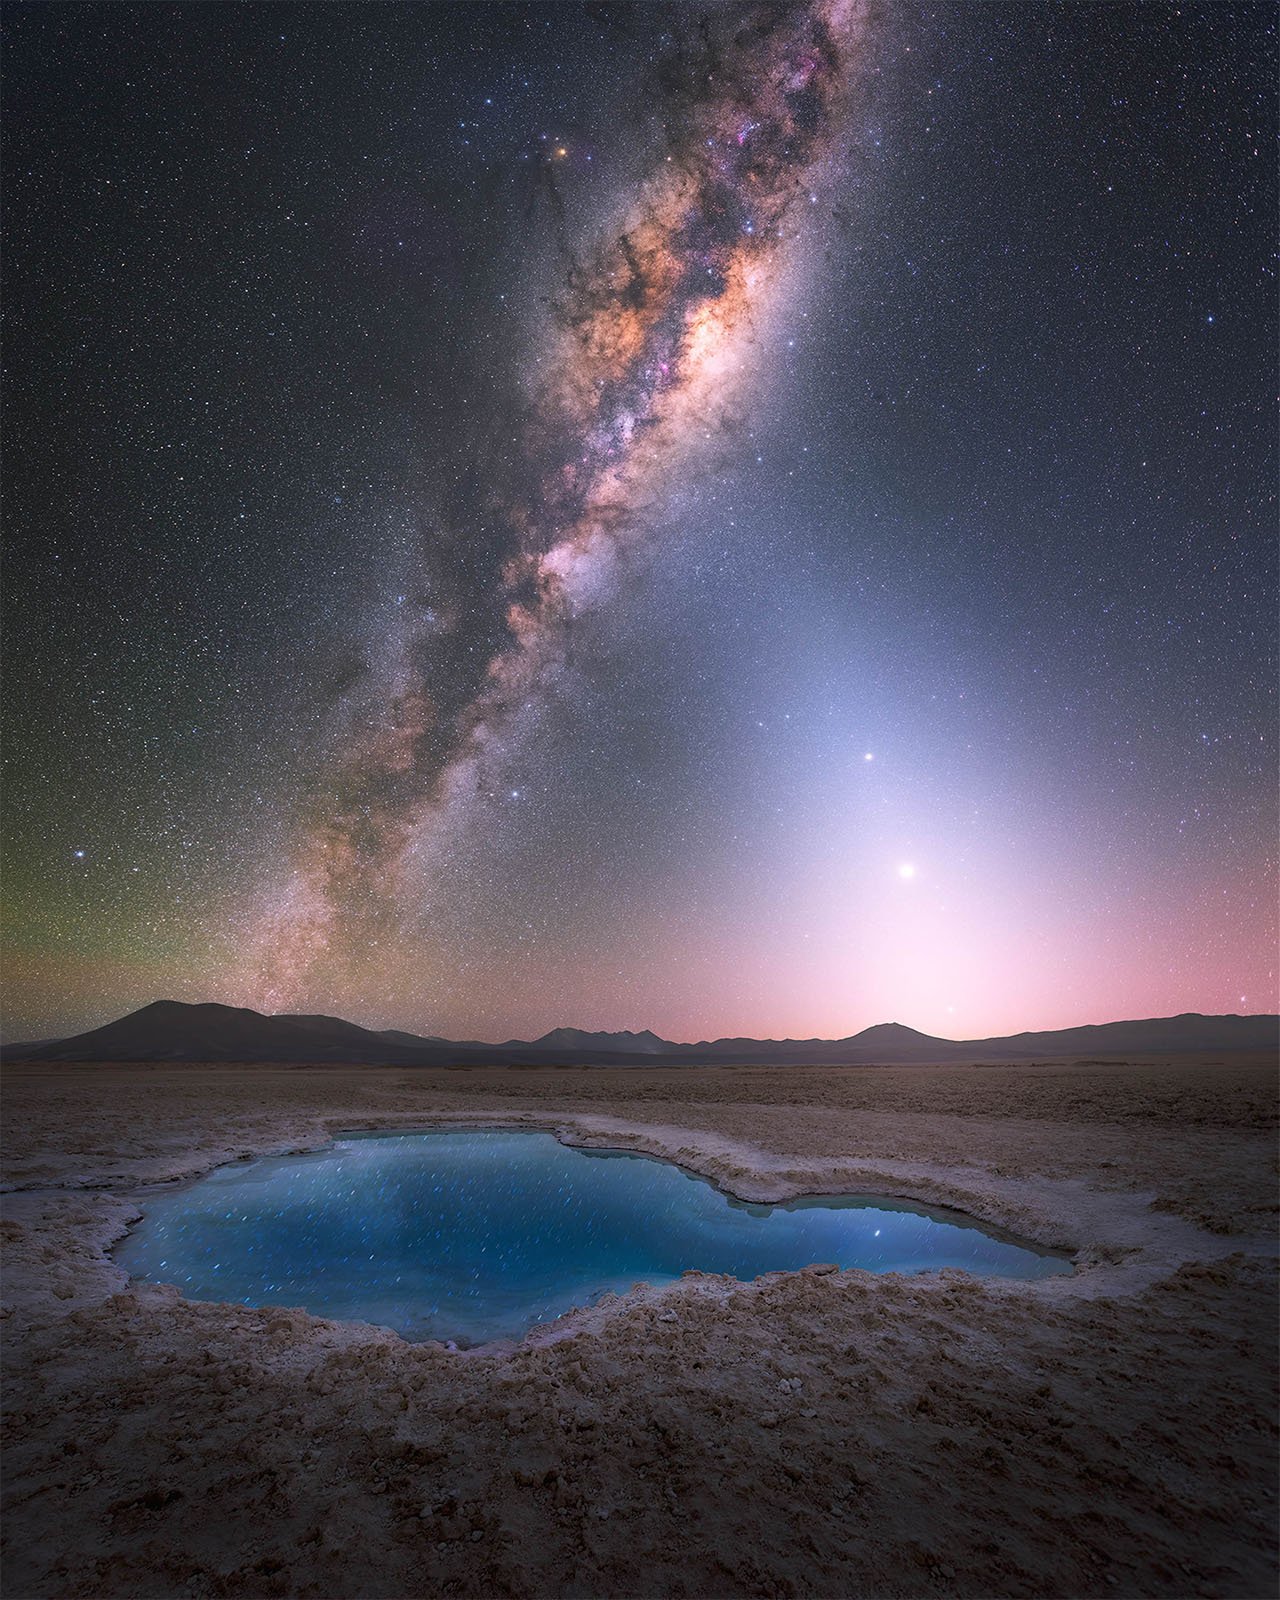  A mesmerizing night sky filled with stars and the Milky Way galaxy stretches above a tranquil desert landscape. Central to the image, a pristine blue pool of water on the ground reflects the starry sky above. Distant mountains frame the horizon under the celestial display.